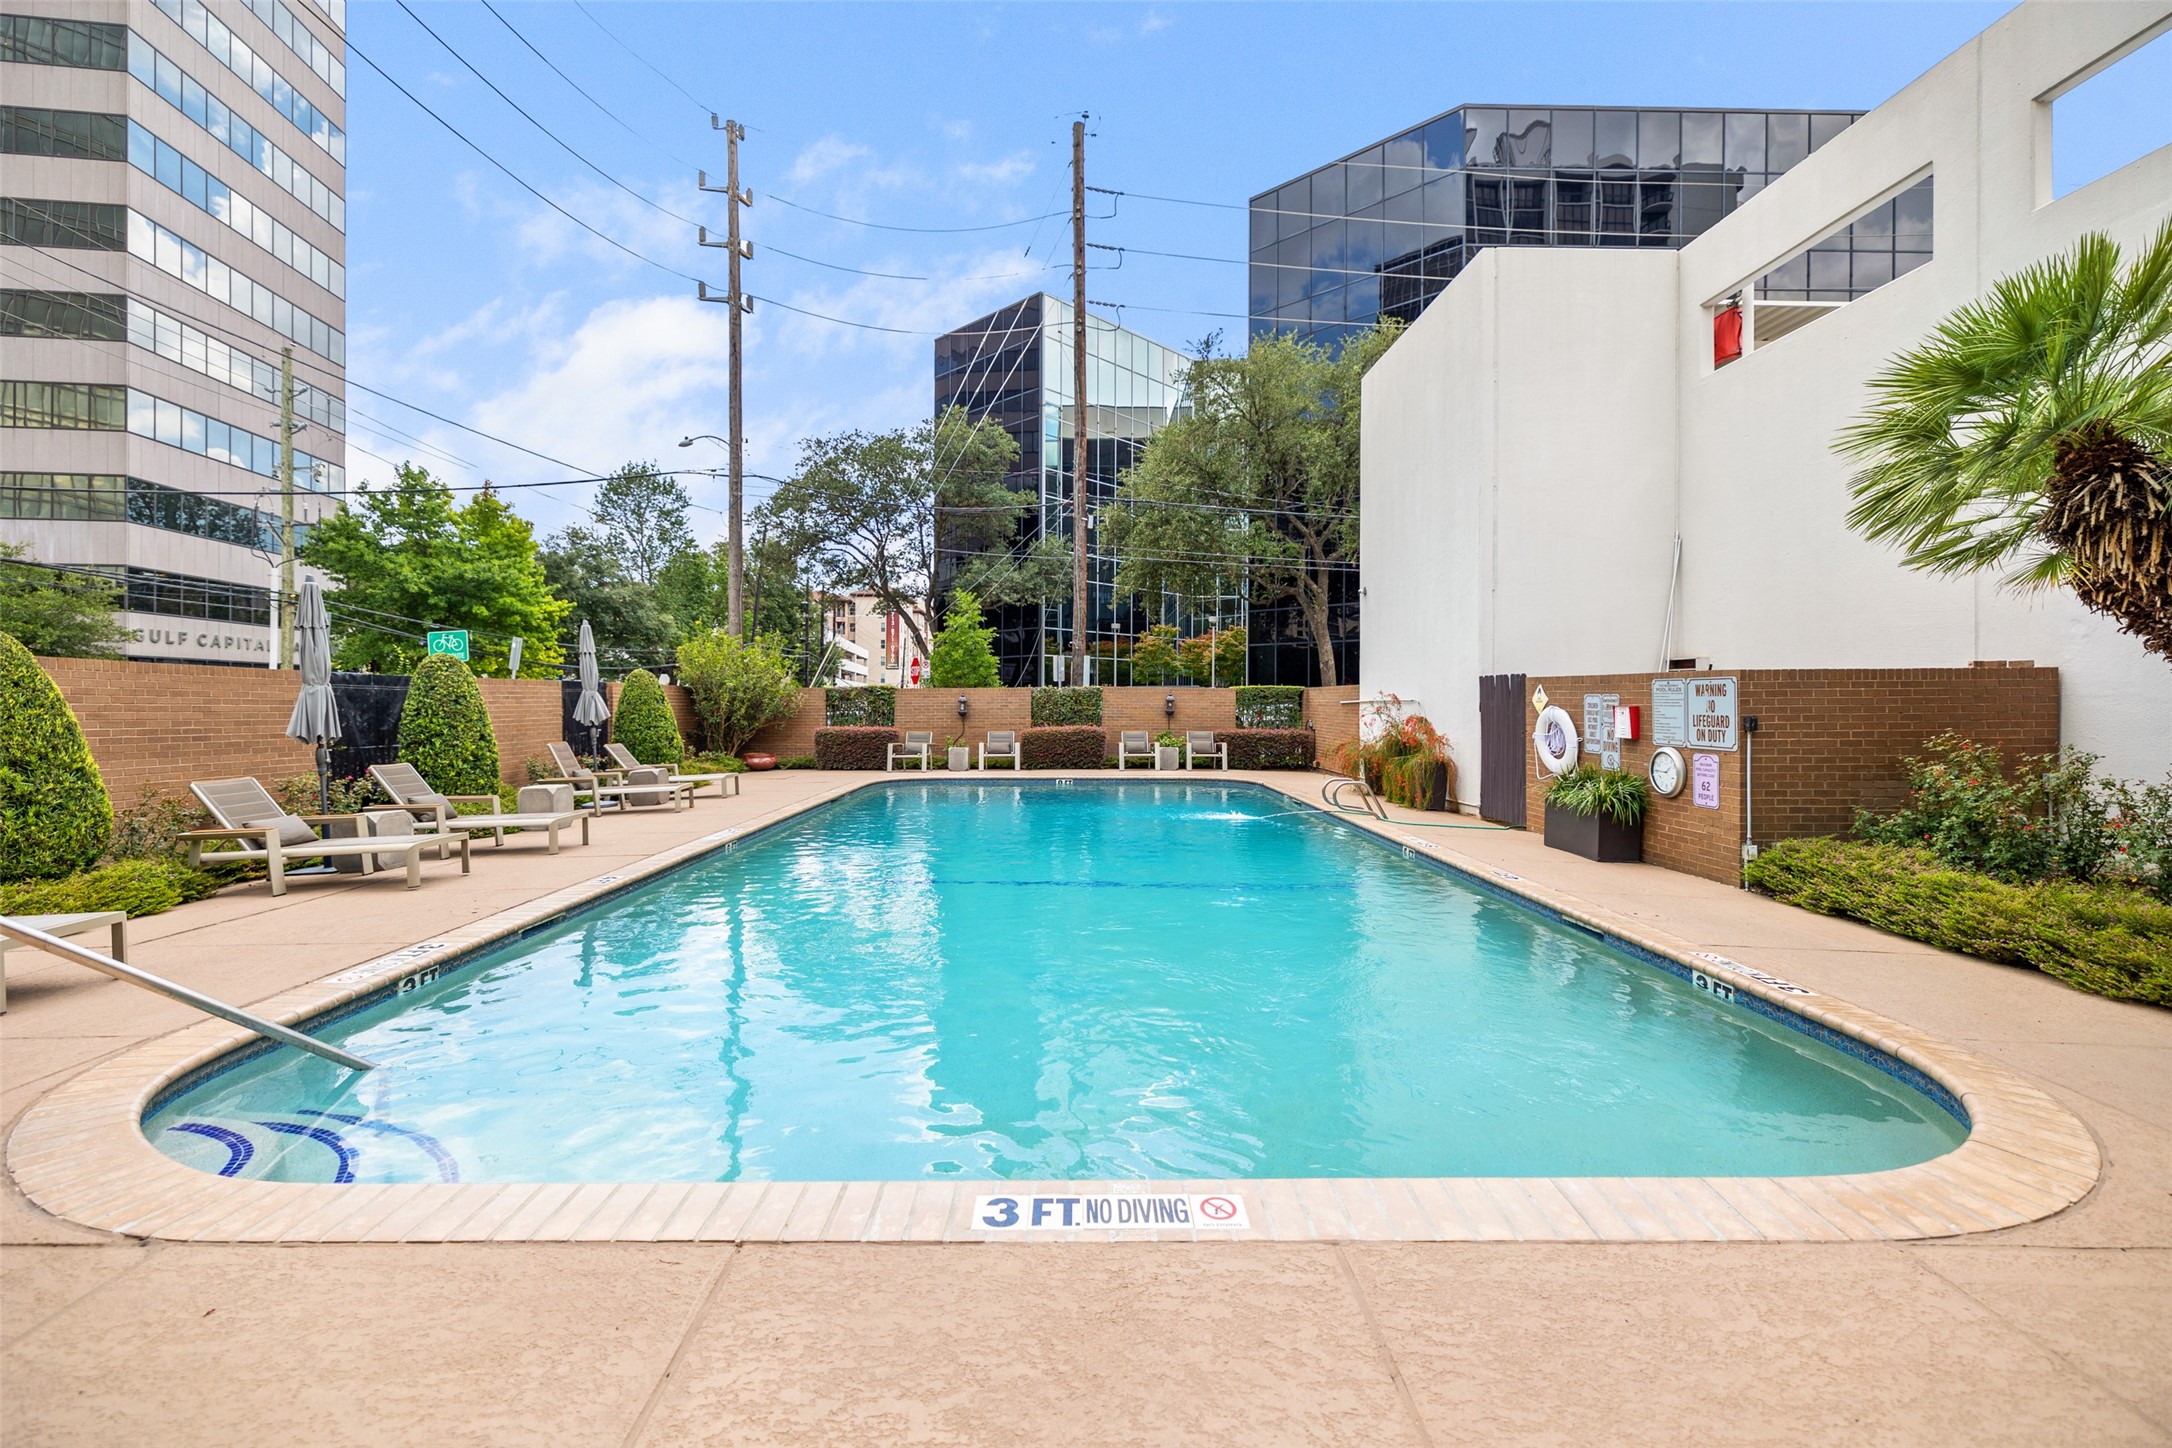 Fully fenced resident pool with custom landscaping provides great privacy and relaxation.